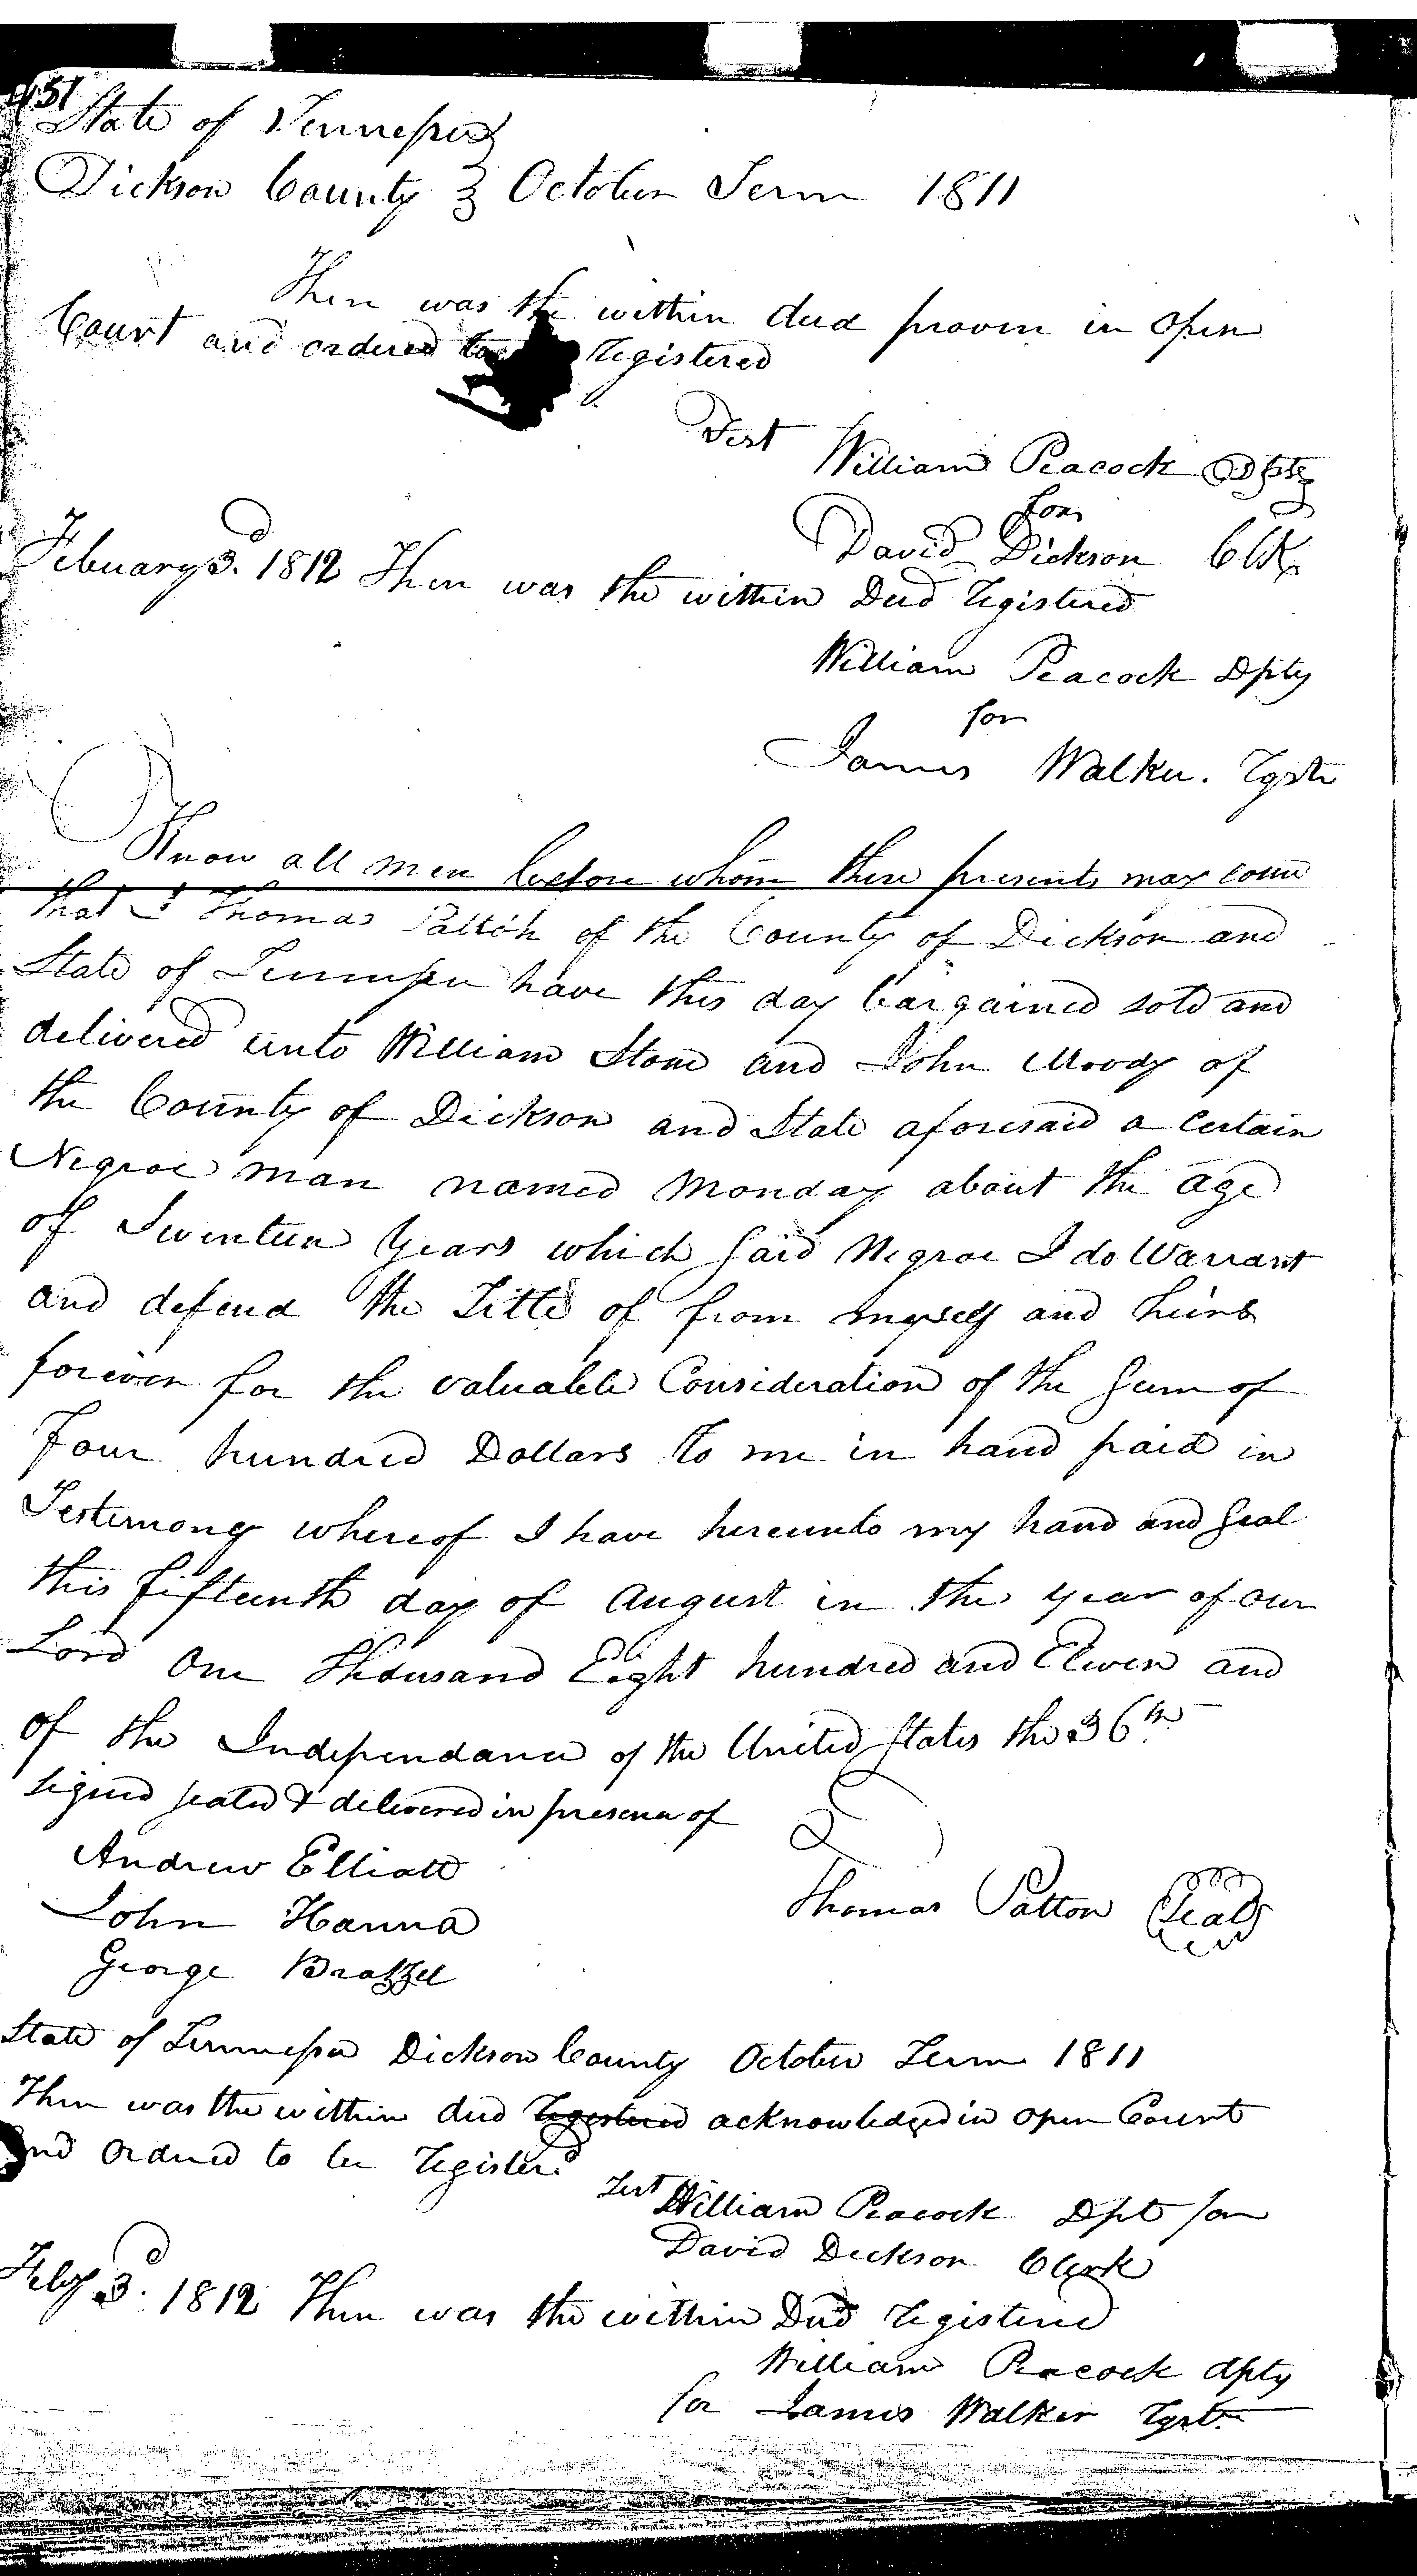 George Brazzell, witness to deed conveying slave, 1811, Dickson County, Tennessee